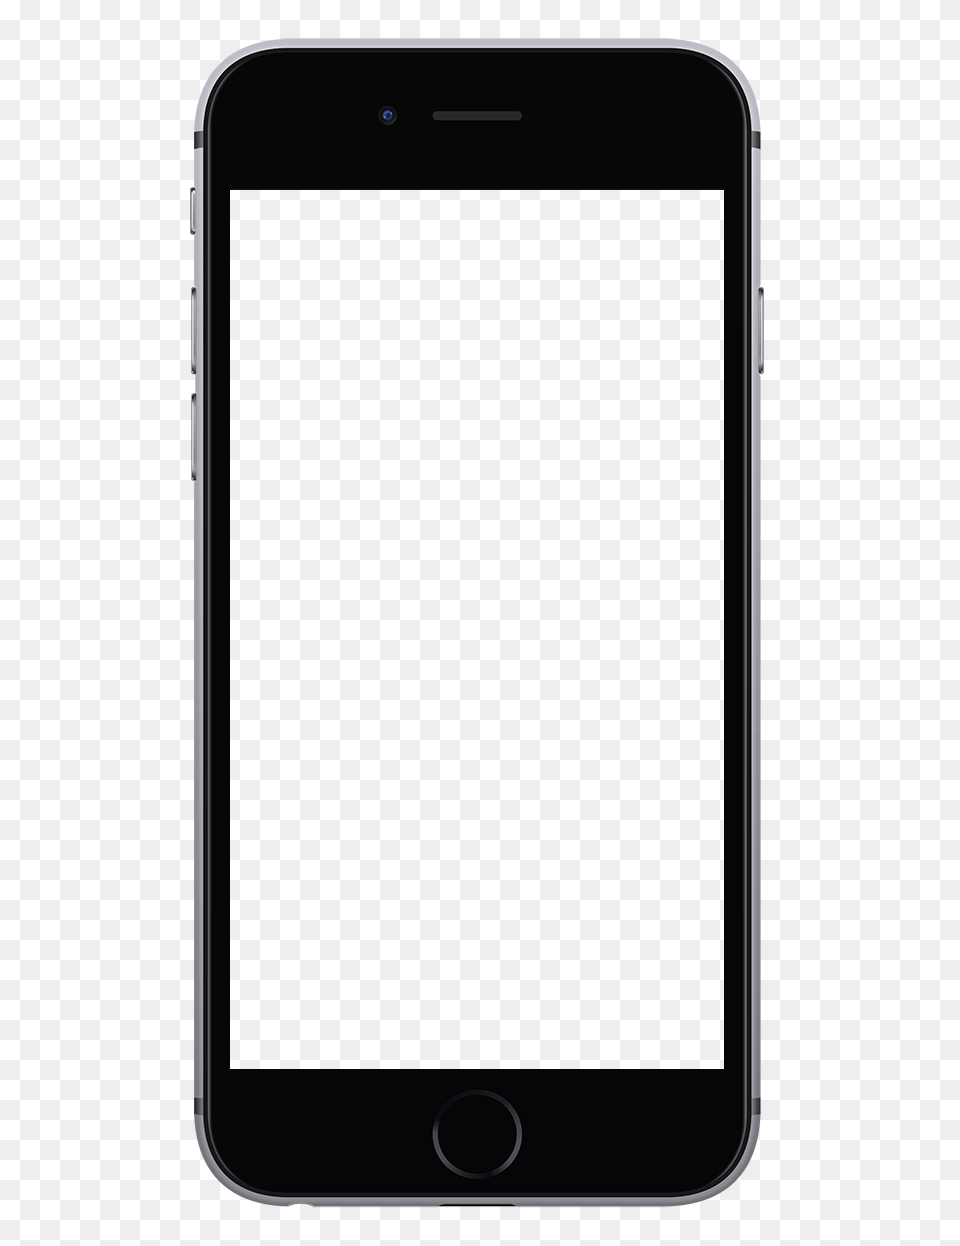 Android Phone Blank Image, Electronics, Mobile Phone, Iphone Free Png